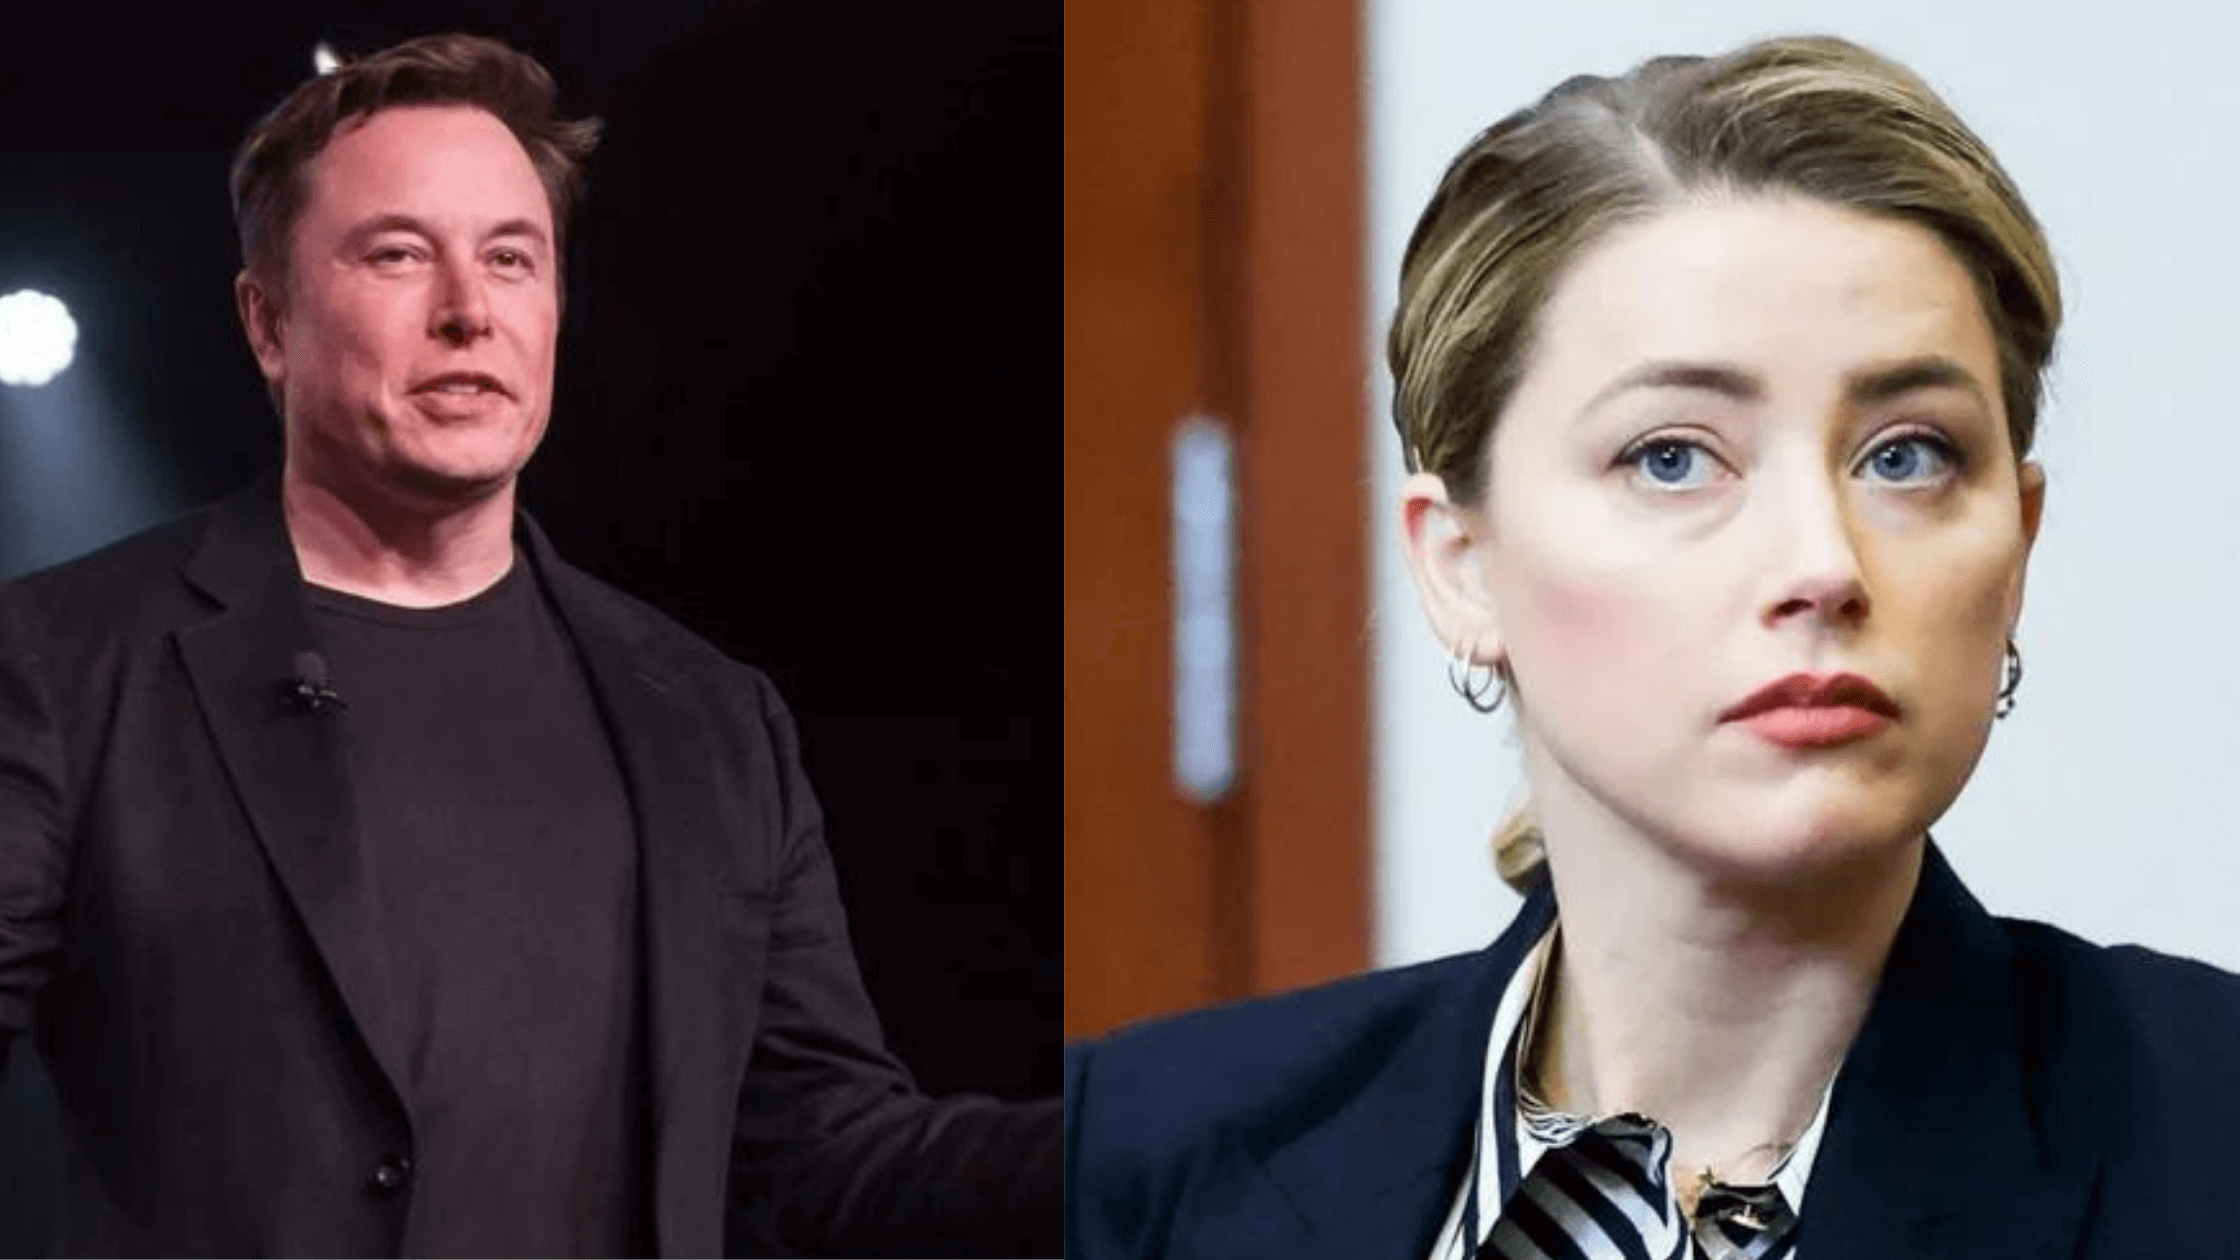 Elon Musk's Age Gap With Amber Heard Has Been Revealed